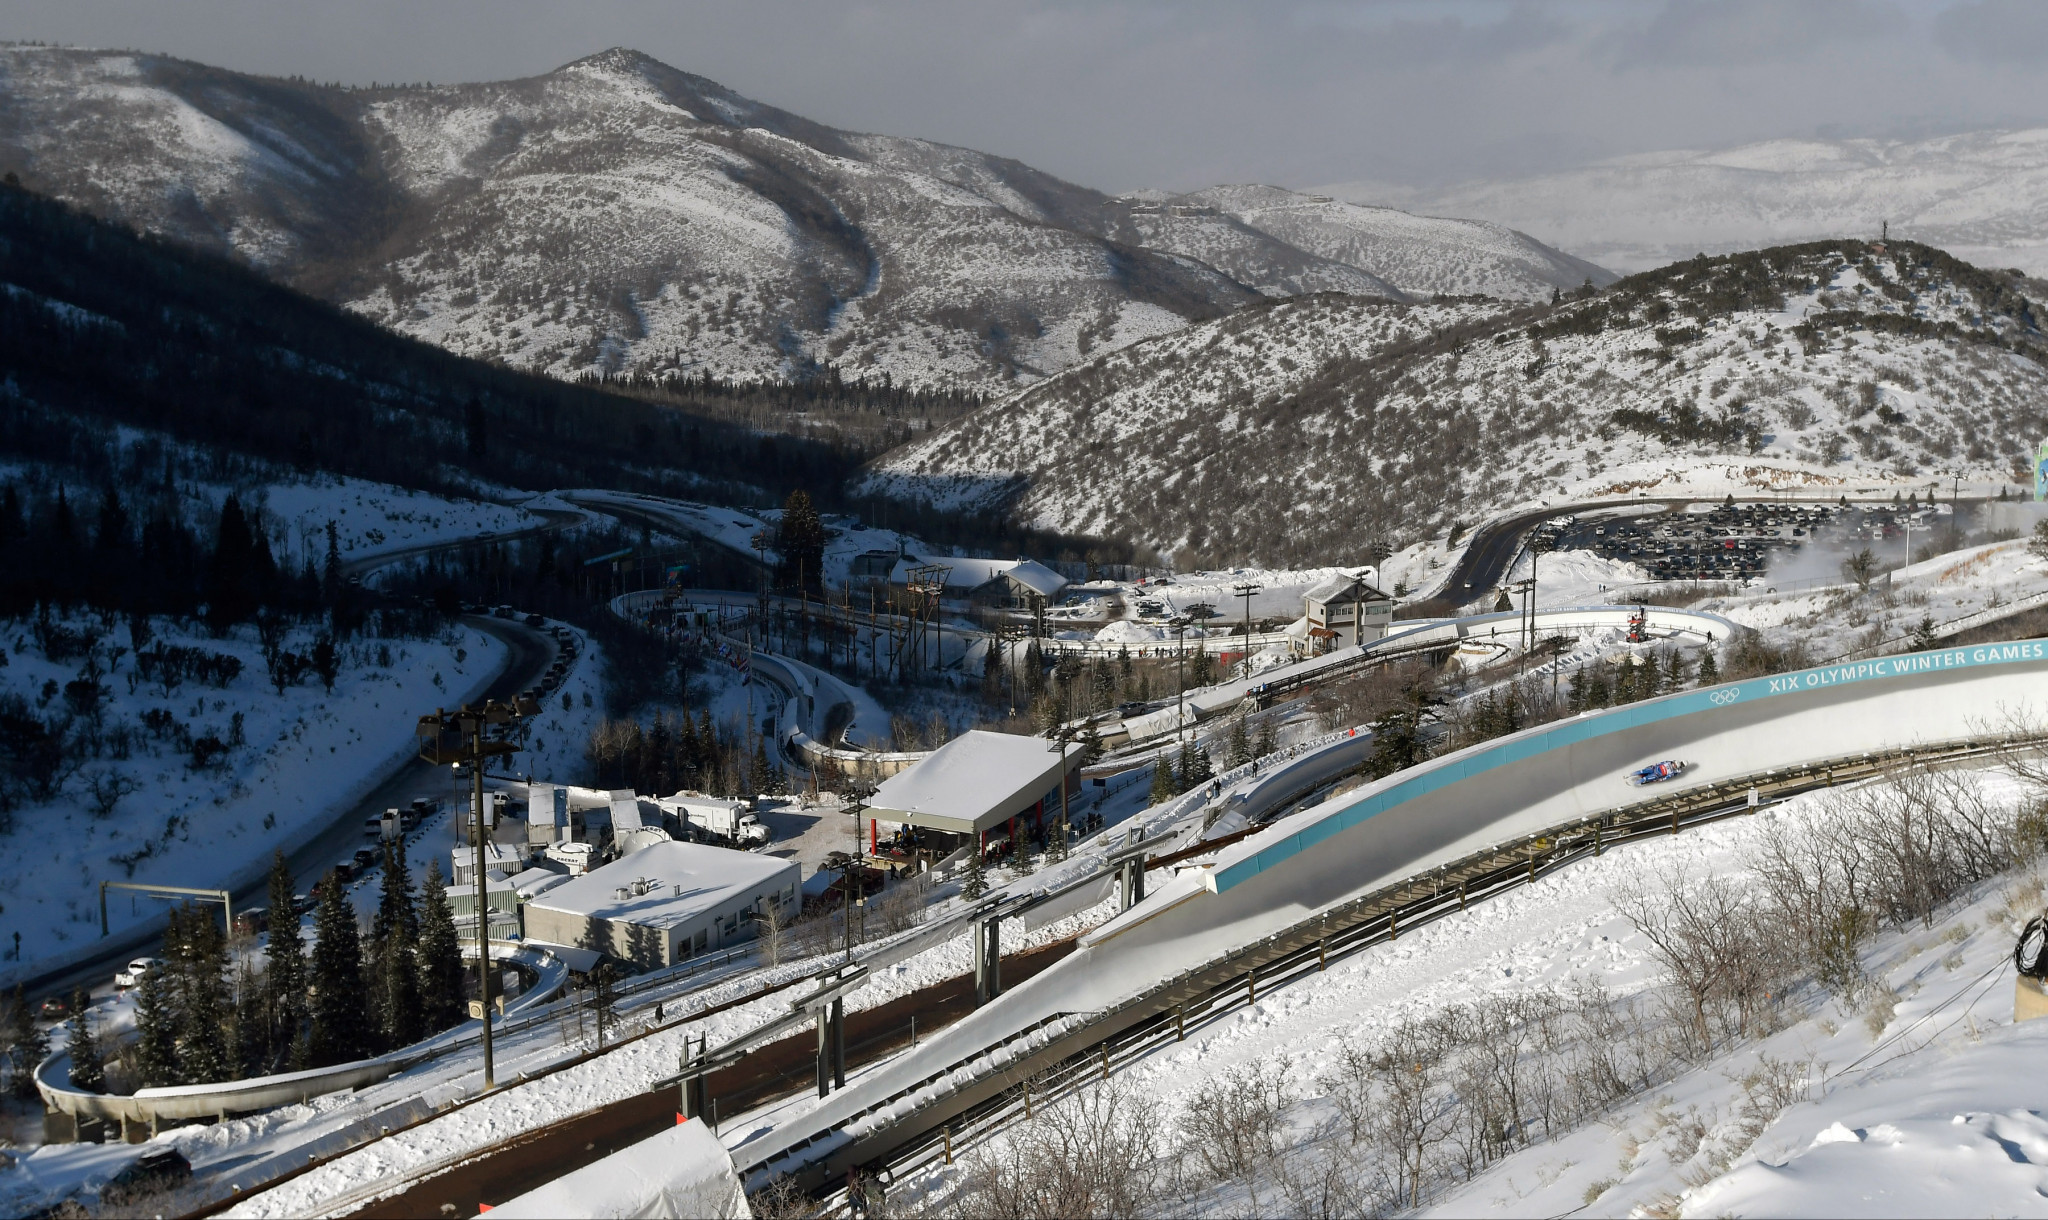 Plans have been announced for an $11 million expansion of Utah Olympic Park ©Getty Images